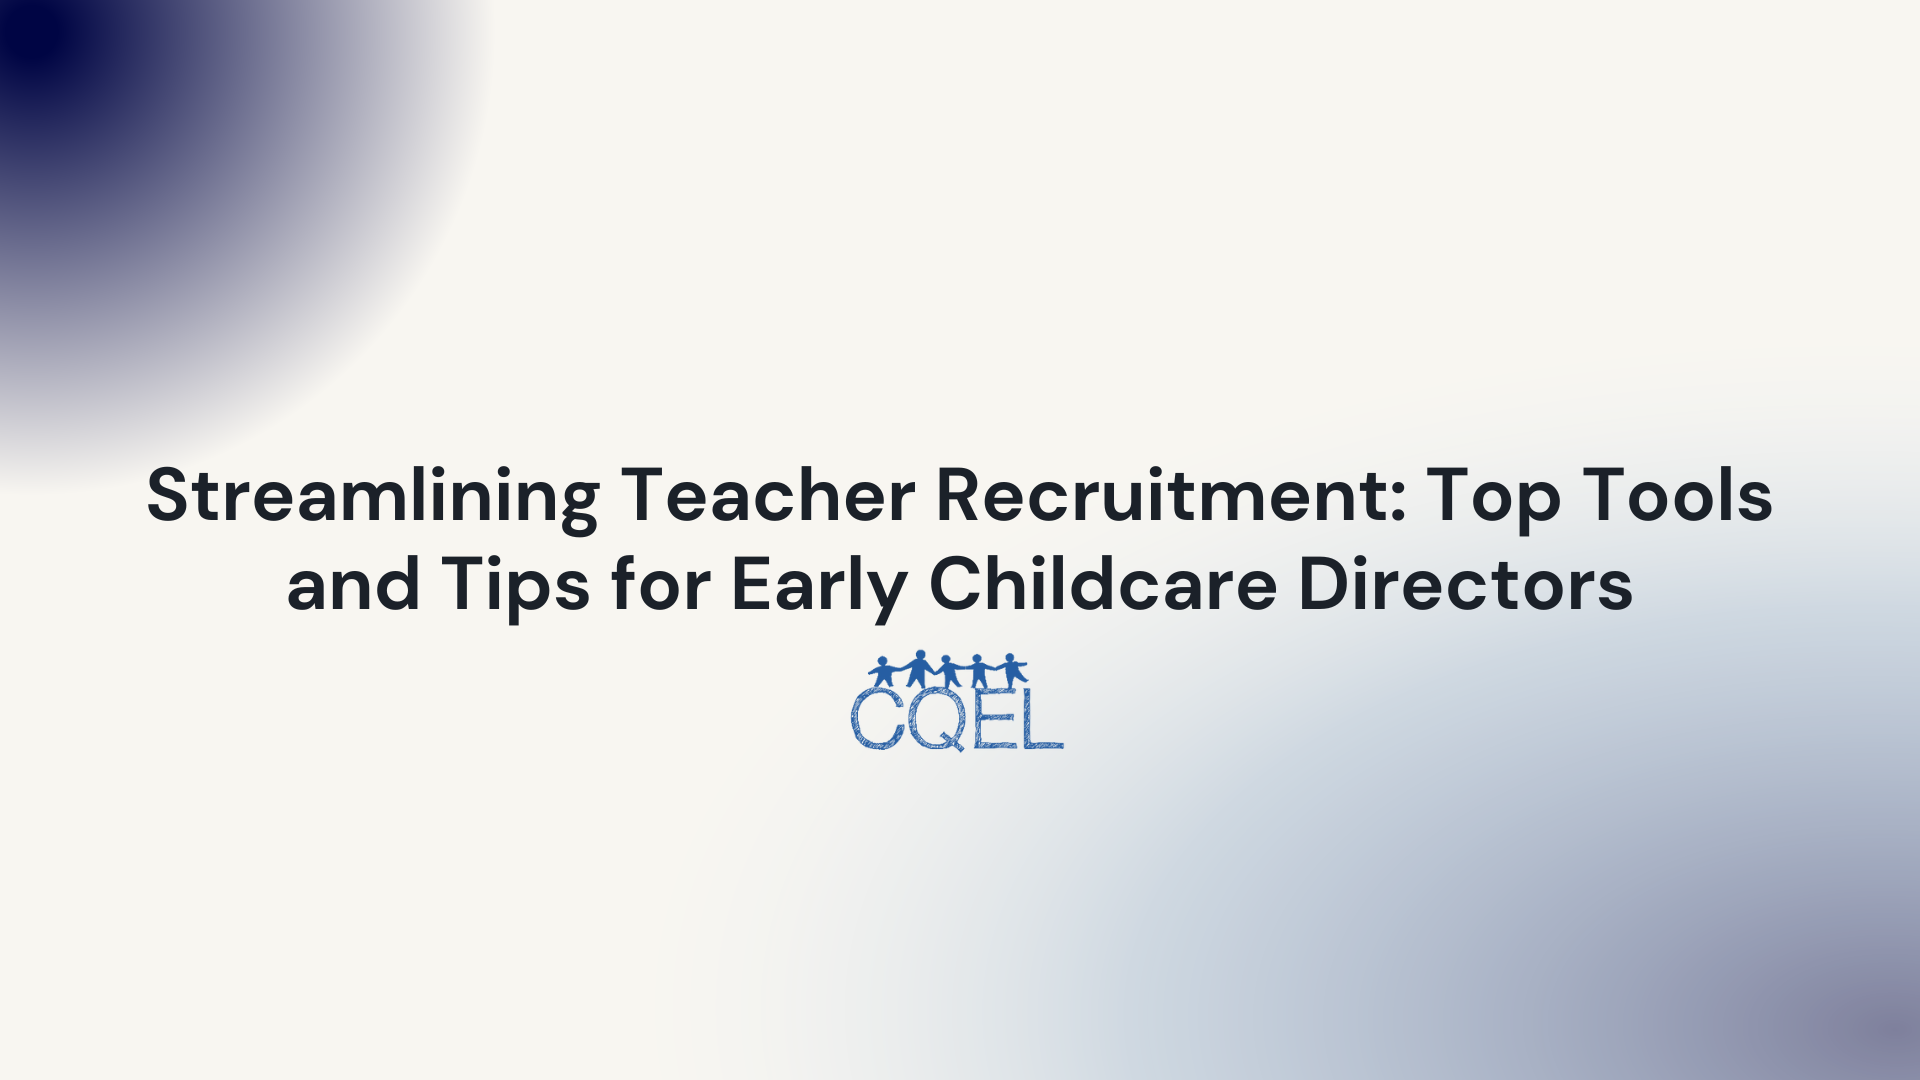 Streamlining Teacher Recruitment: Top Tools and Tips for Early Childcare Directors